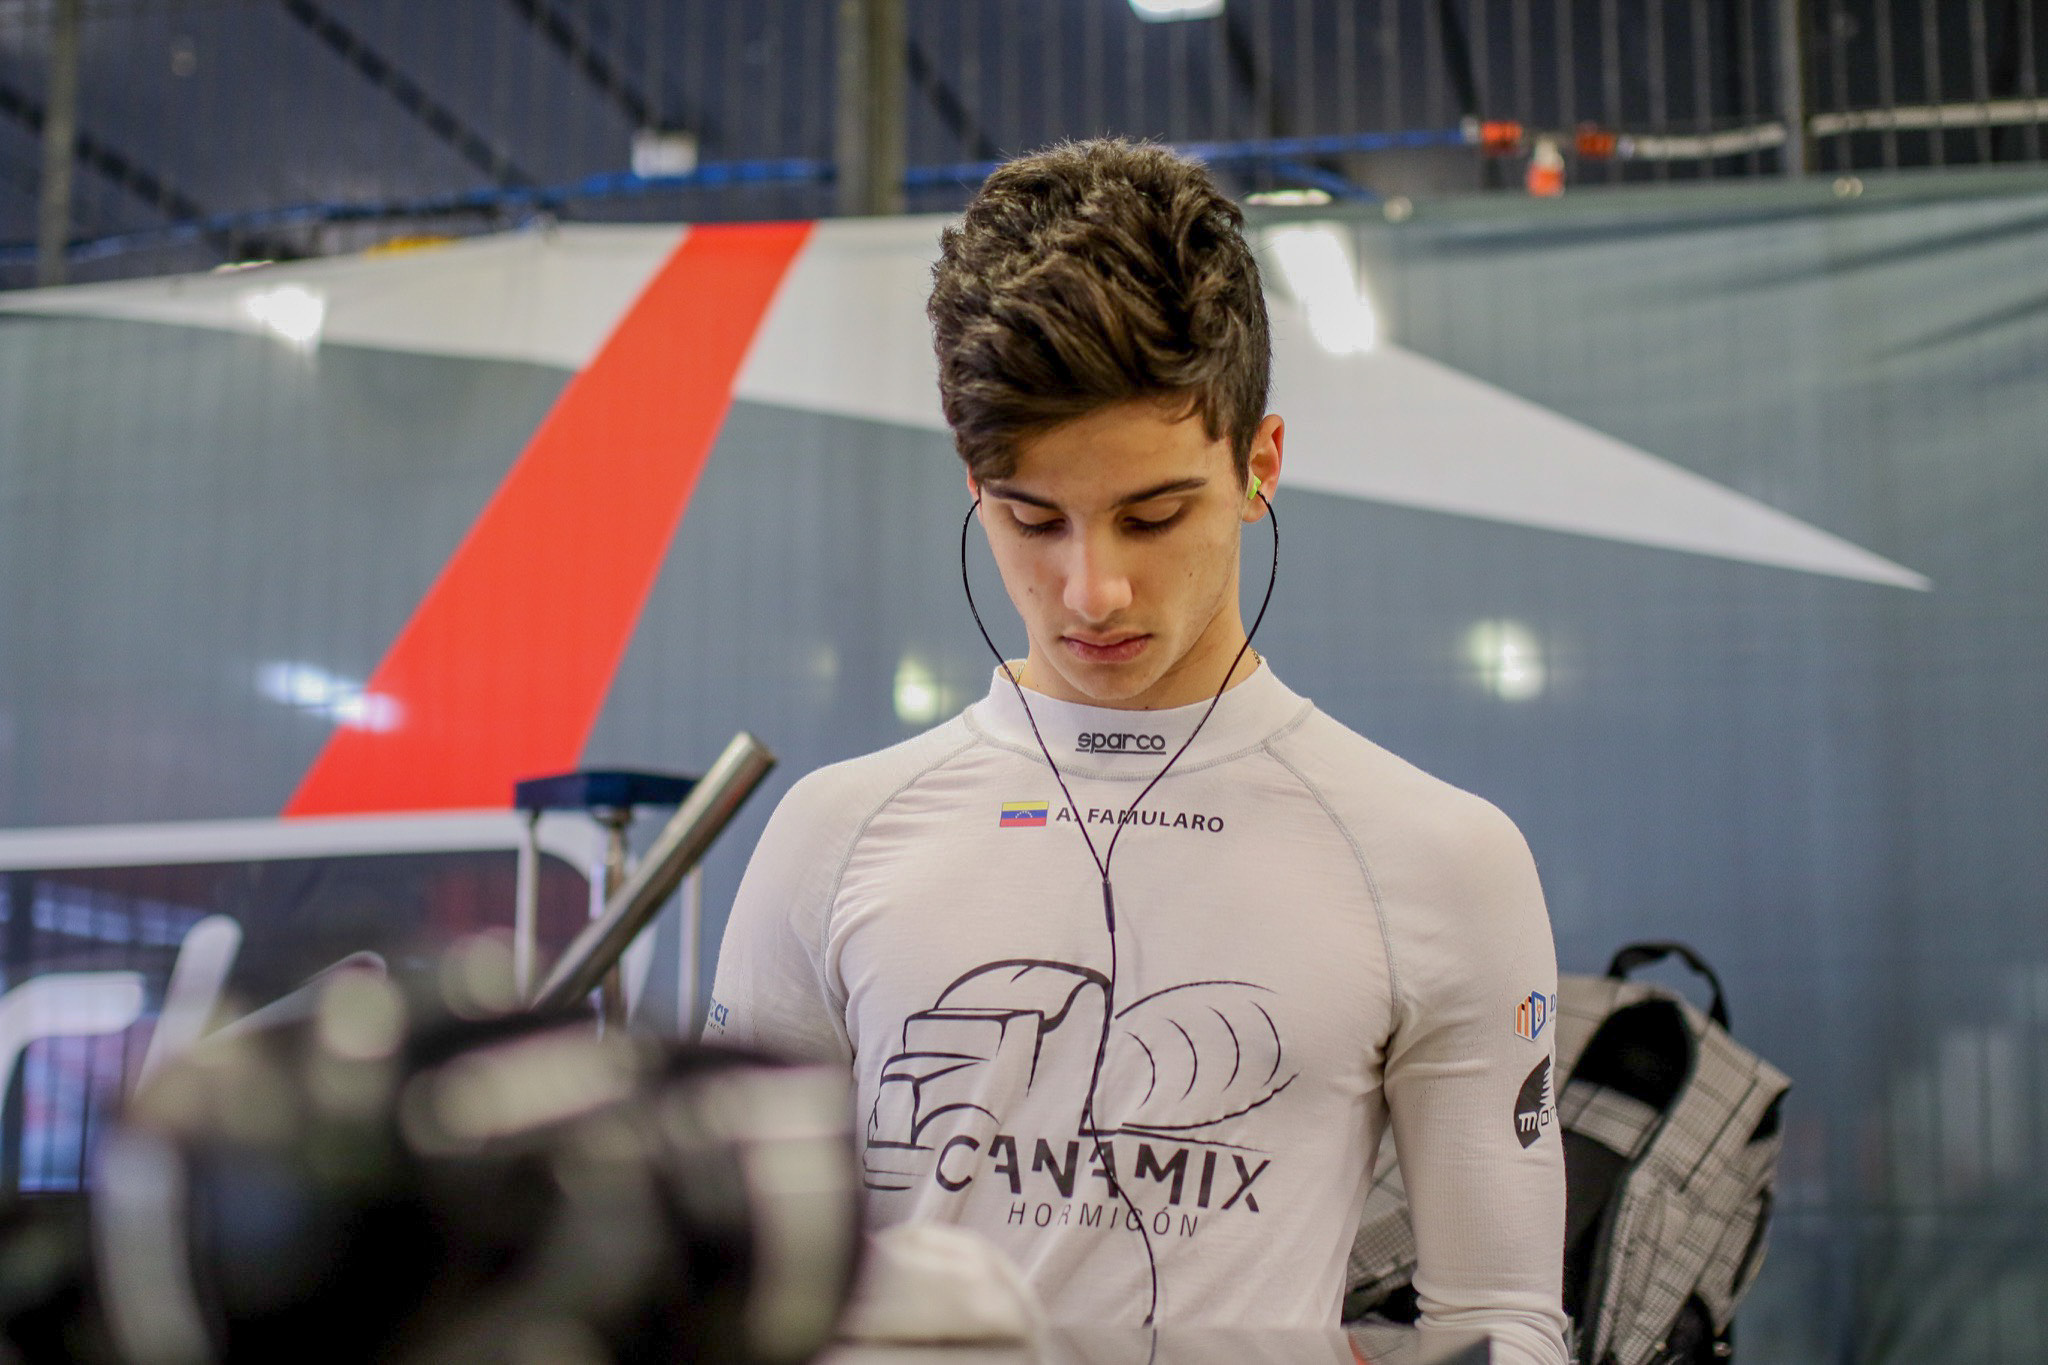 G4 Racing adds Alessandro Famularo, expands to three cars in Barcelona